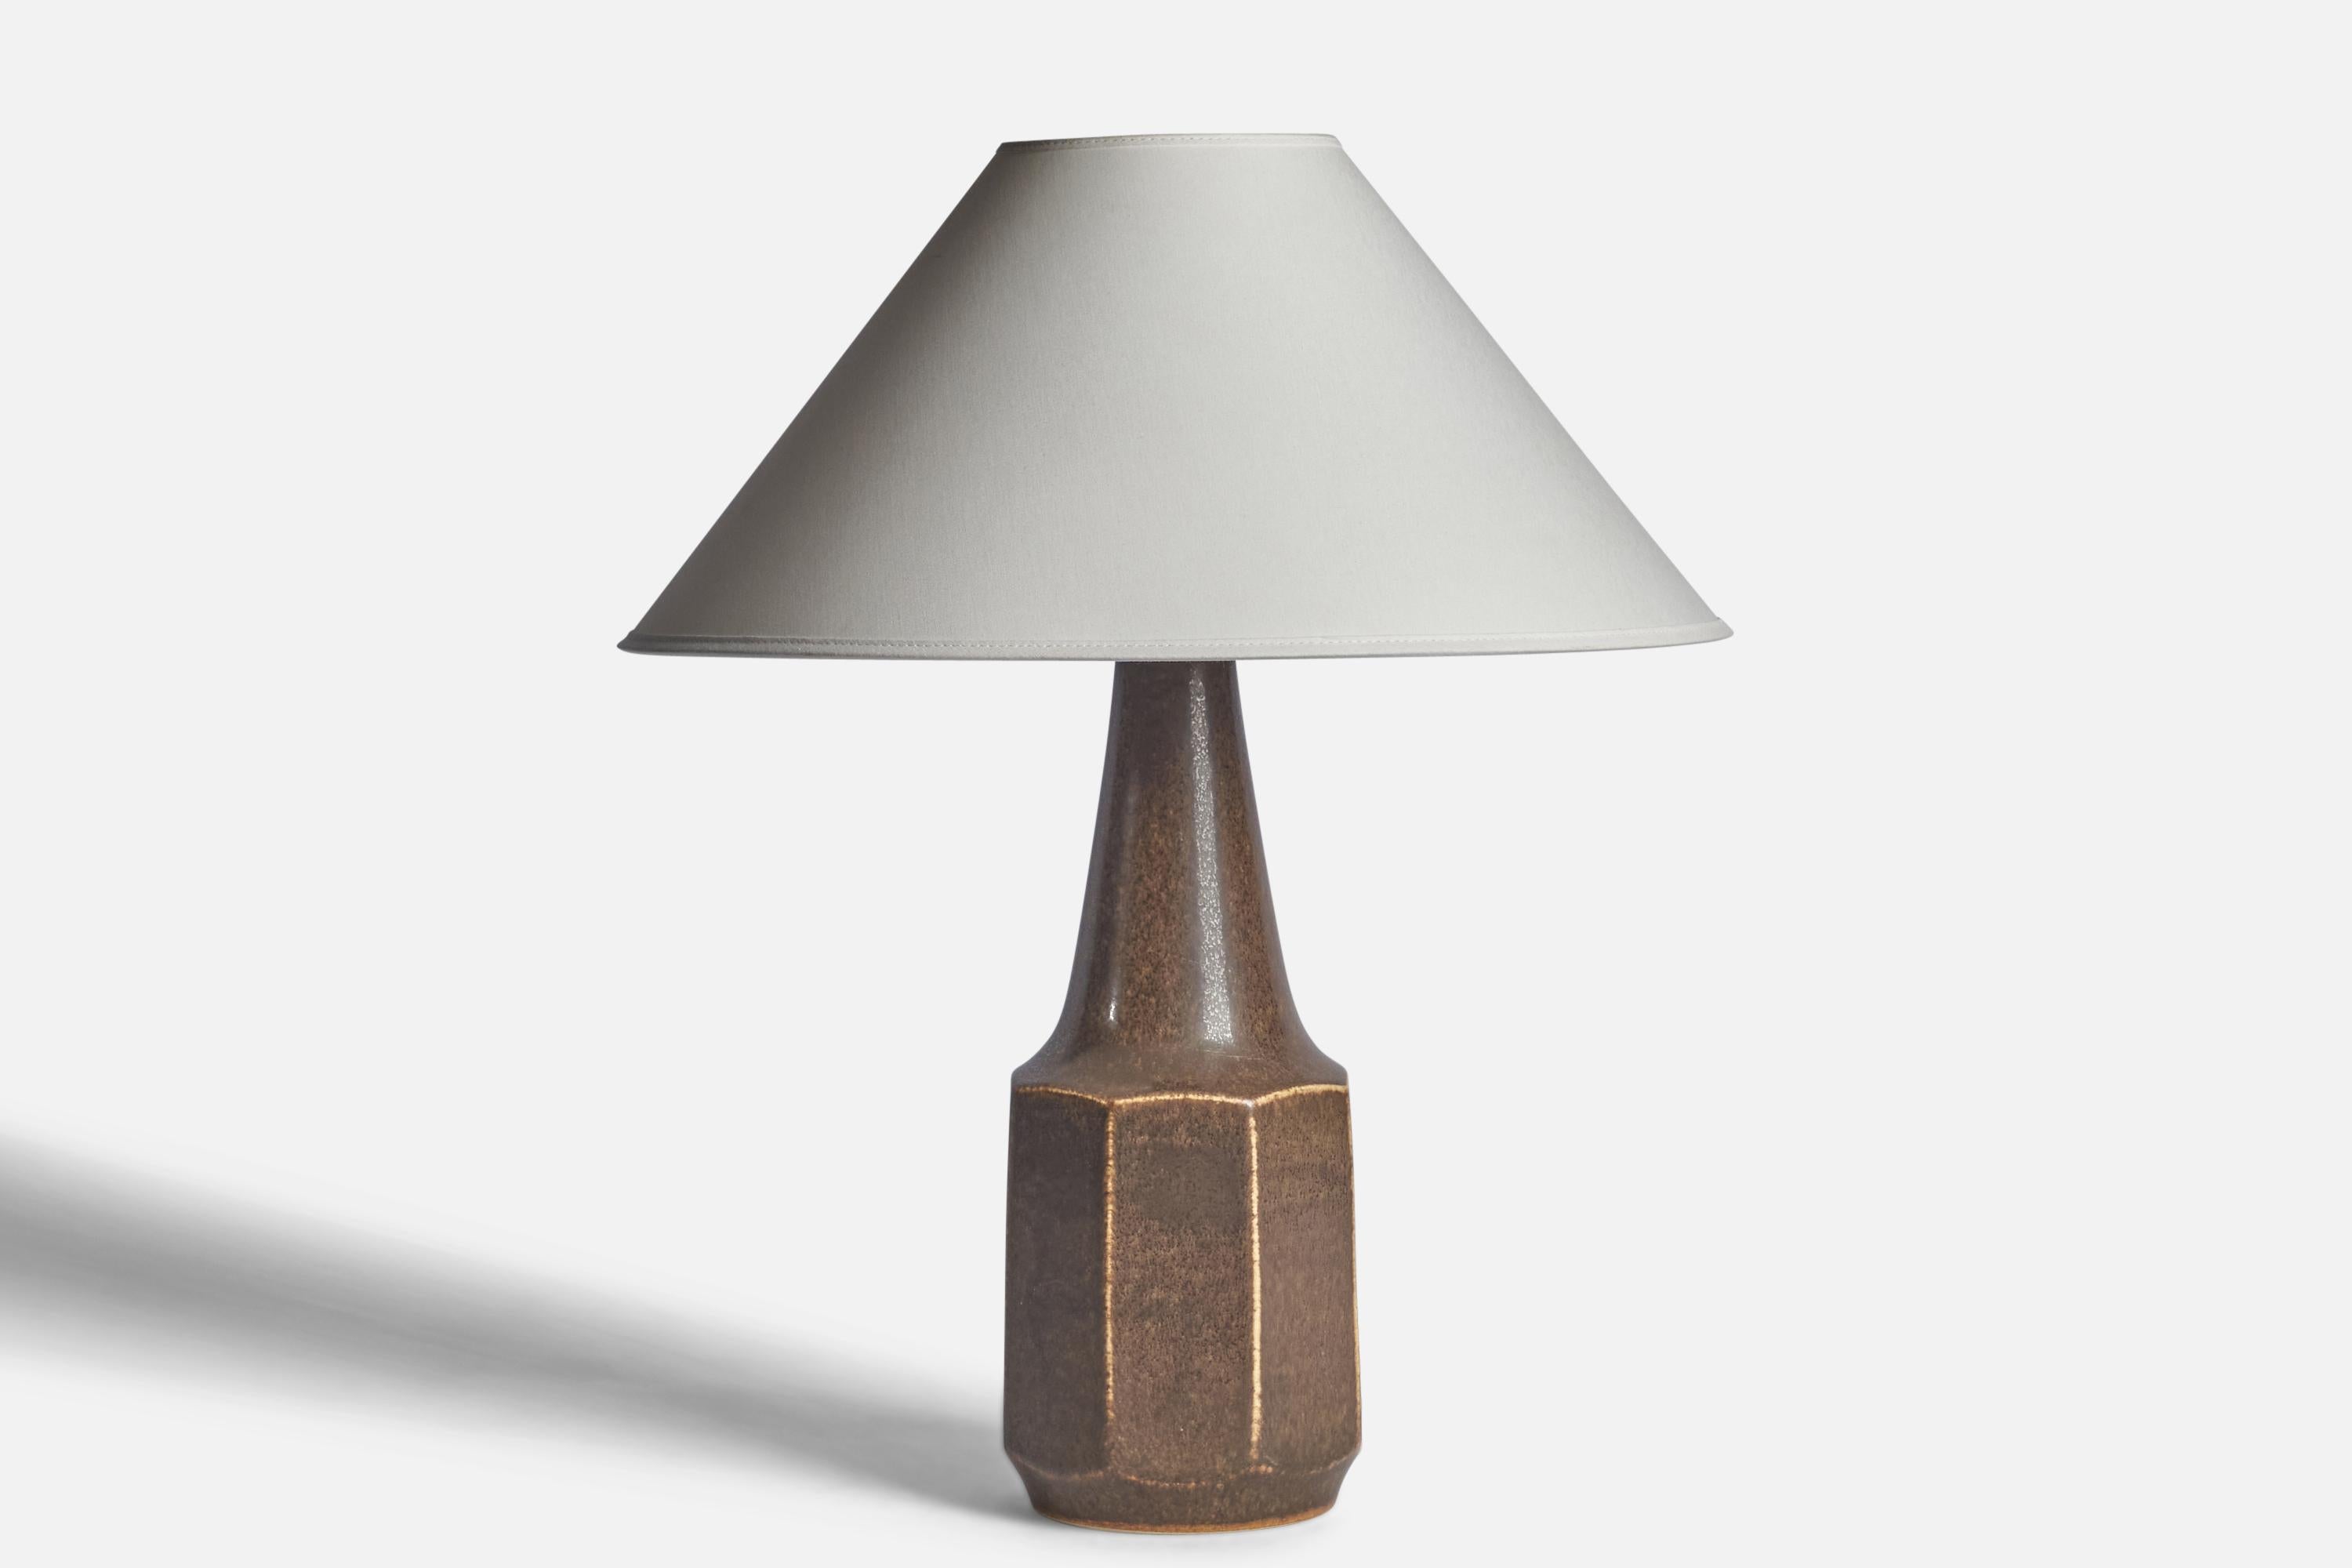 A brown-glazed stoneware table lamp designed by Marianne Starck and produced by Michael Andersen, Bornholm, Denmark, c. 1960s.

Dimensions of Lamp (inches): 15.5 H x 5” Diameter
Dimensions of Shade (inches): 4.5” Top Diameter x 16” Bottom Diameter x